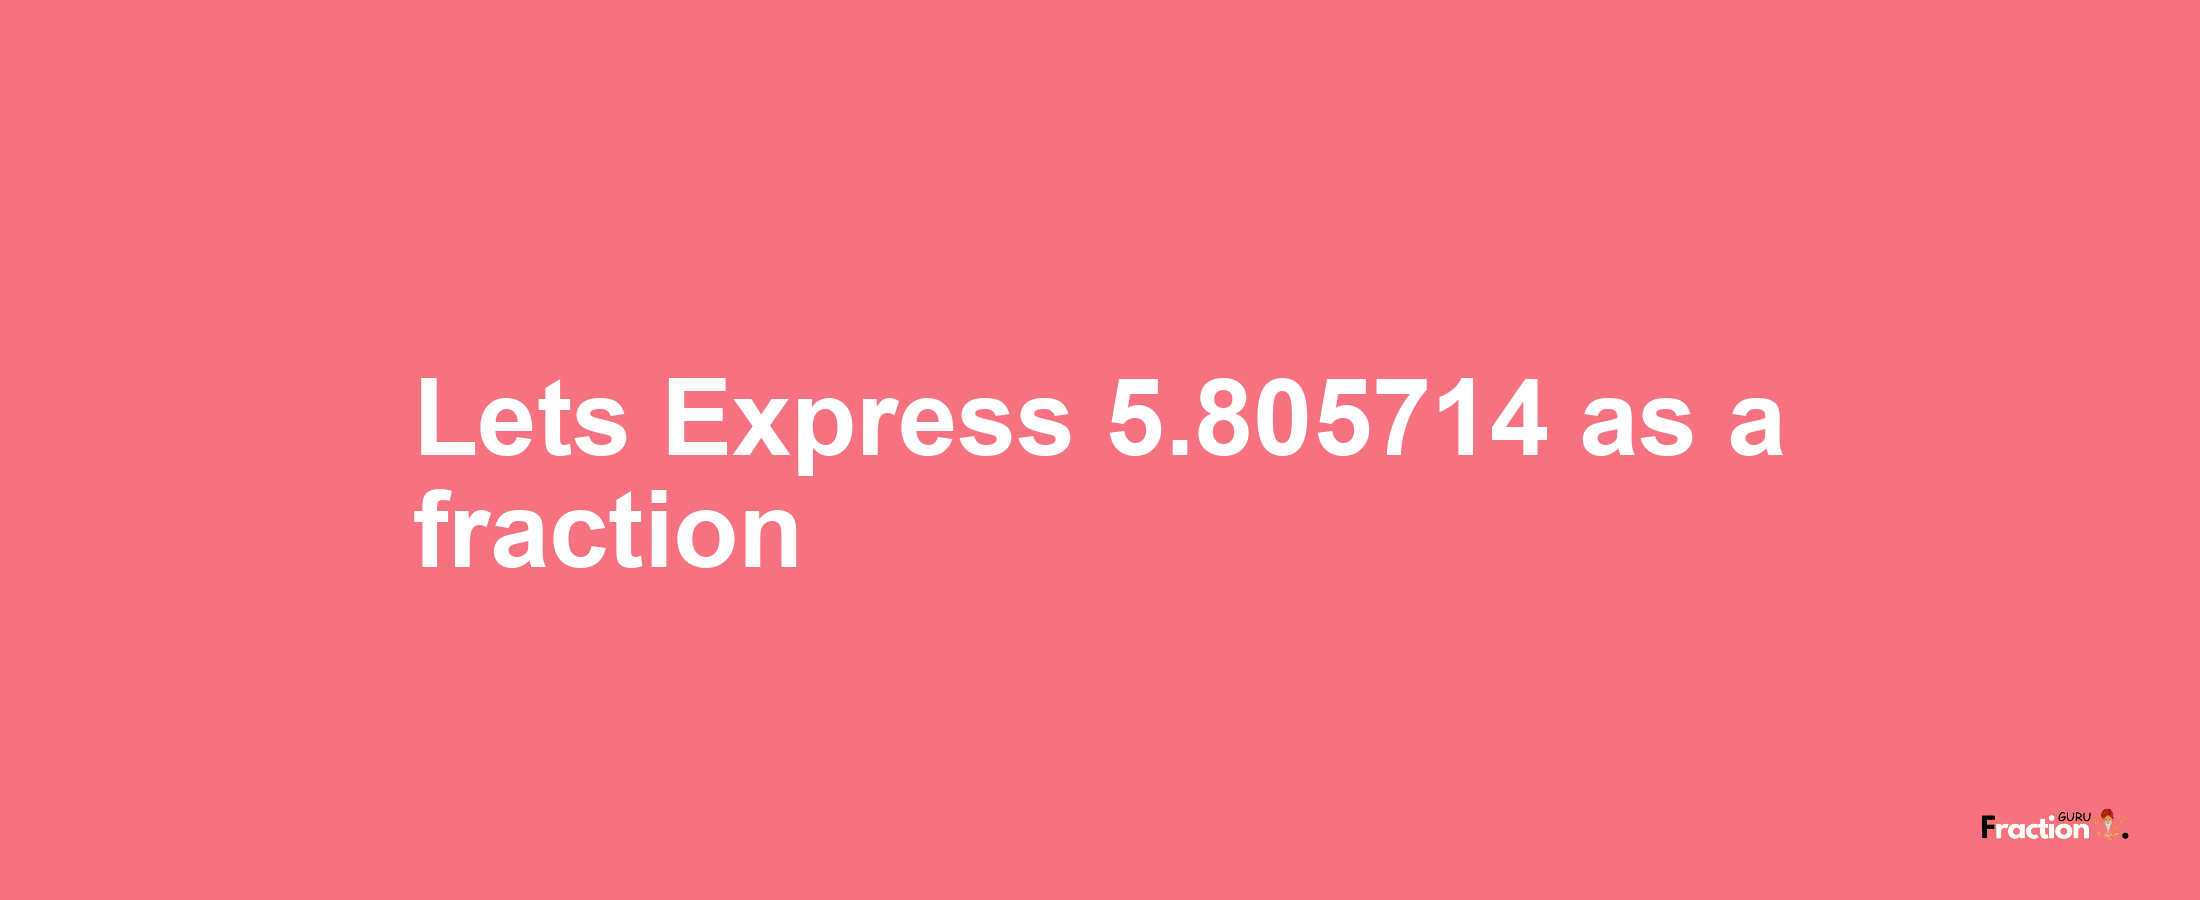 Lets Express 5.805714 as afraction